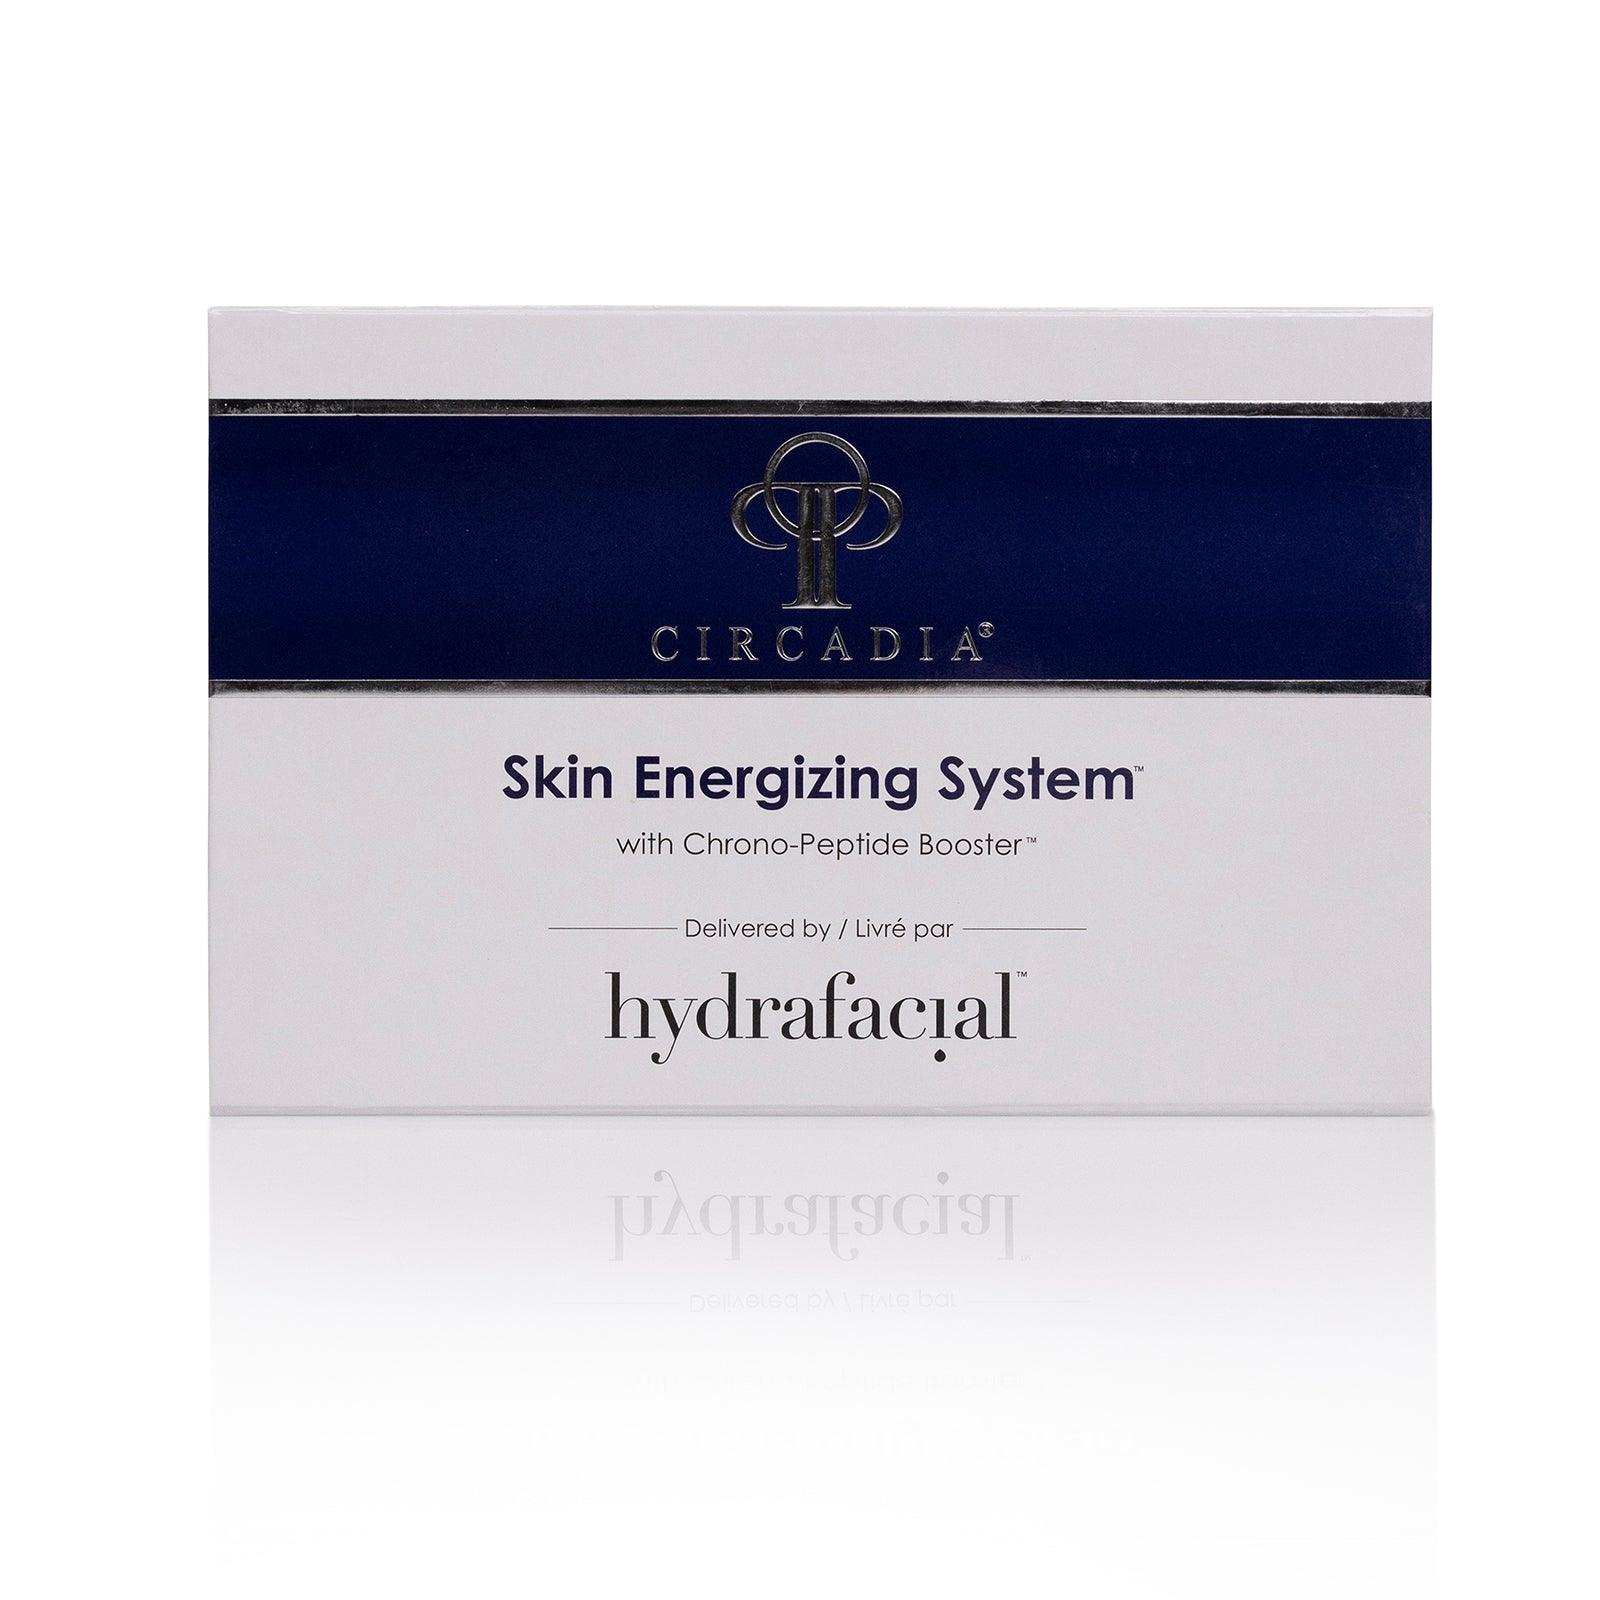 Skin Energizing System with Chrono-Peptide Booster for HydraFacial - CIRCADIA